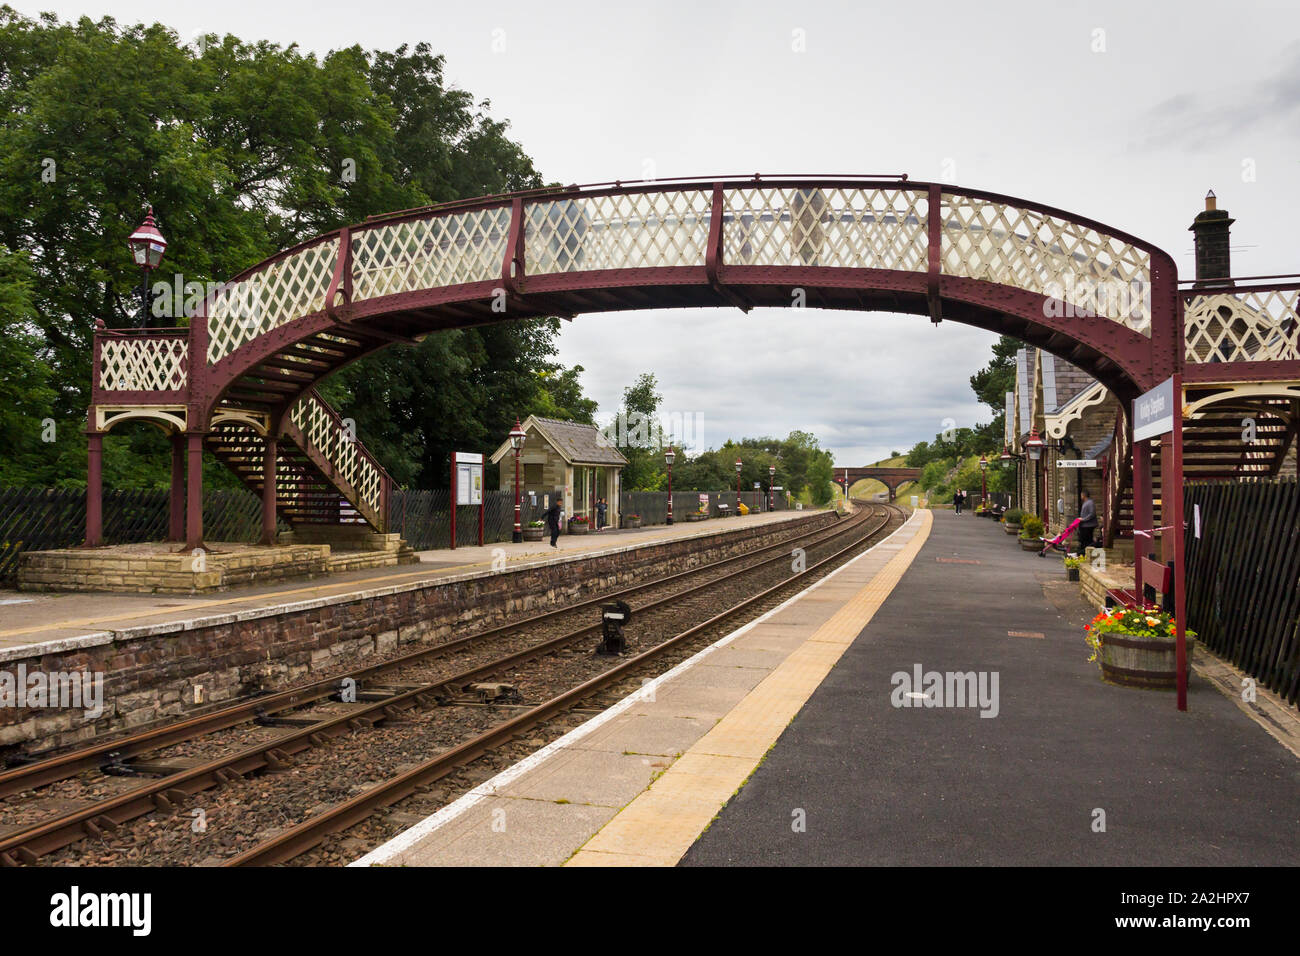 The railway station at Kirkby Stephen in Cumbria on a dull, cloudy day, looking in the northbound direction. Stock Photo